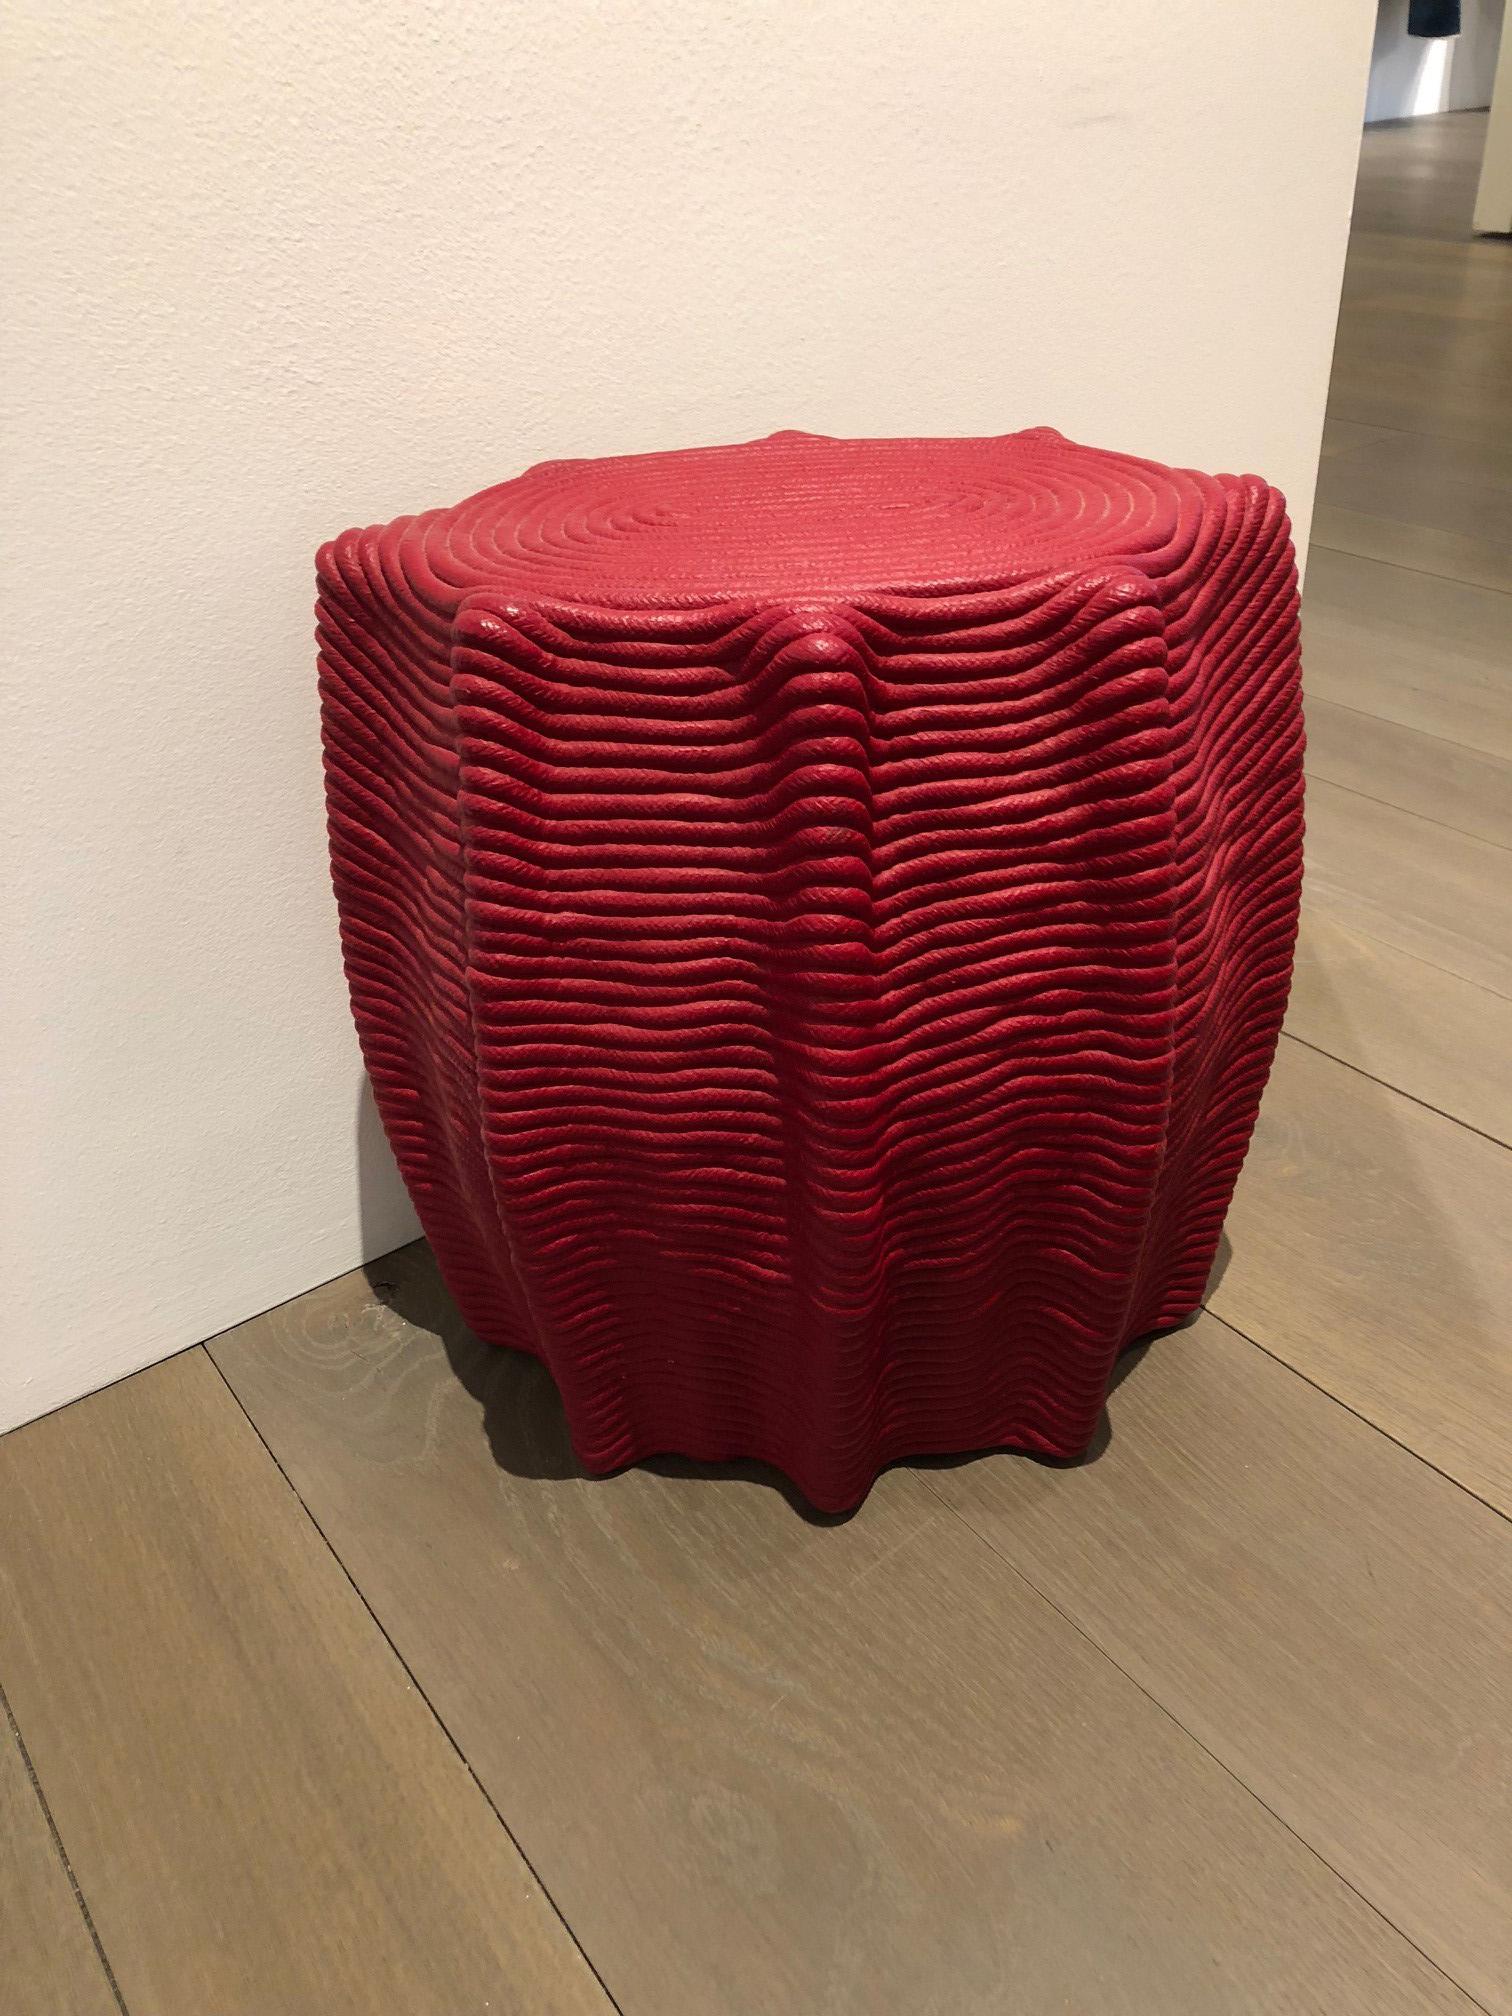 HOLLY HUNT Mivalo stool in Carmin red cotton cord by Christian Astuguevieille

Additional Information:
Materials: Carmin red painted cotton cord
Dimensions: 15.75 W x 11.75 D x 17.75 H inch
Available in other finish options: Ceruleum Blue